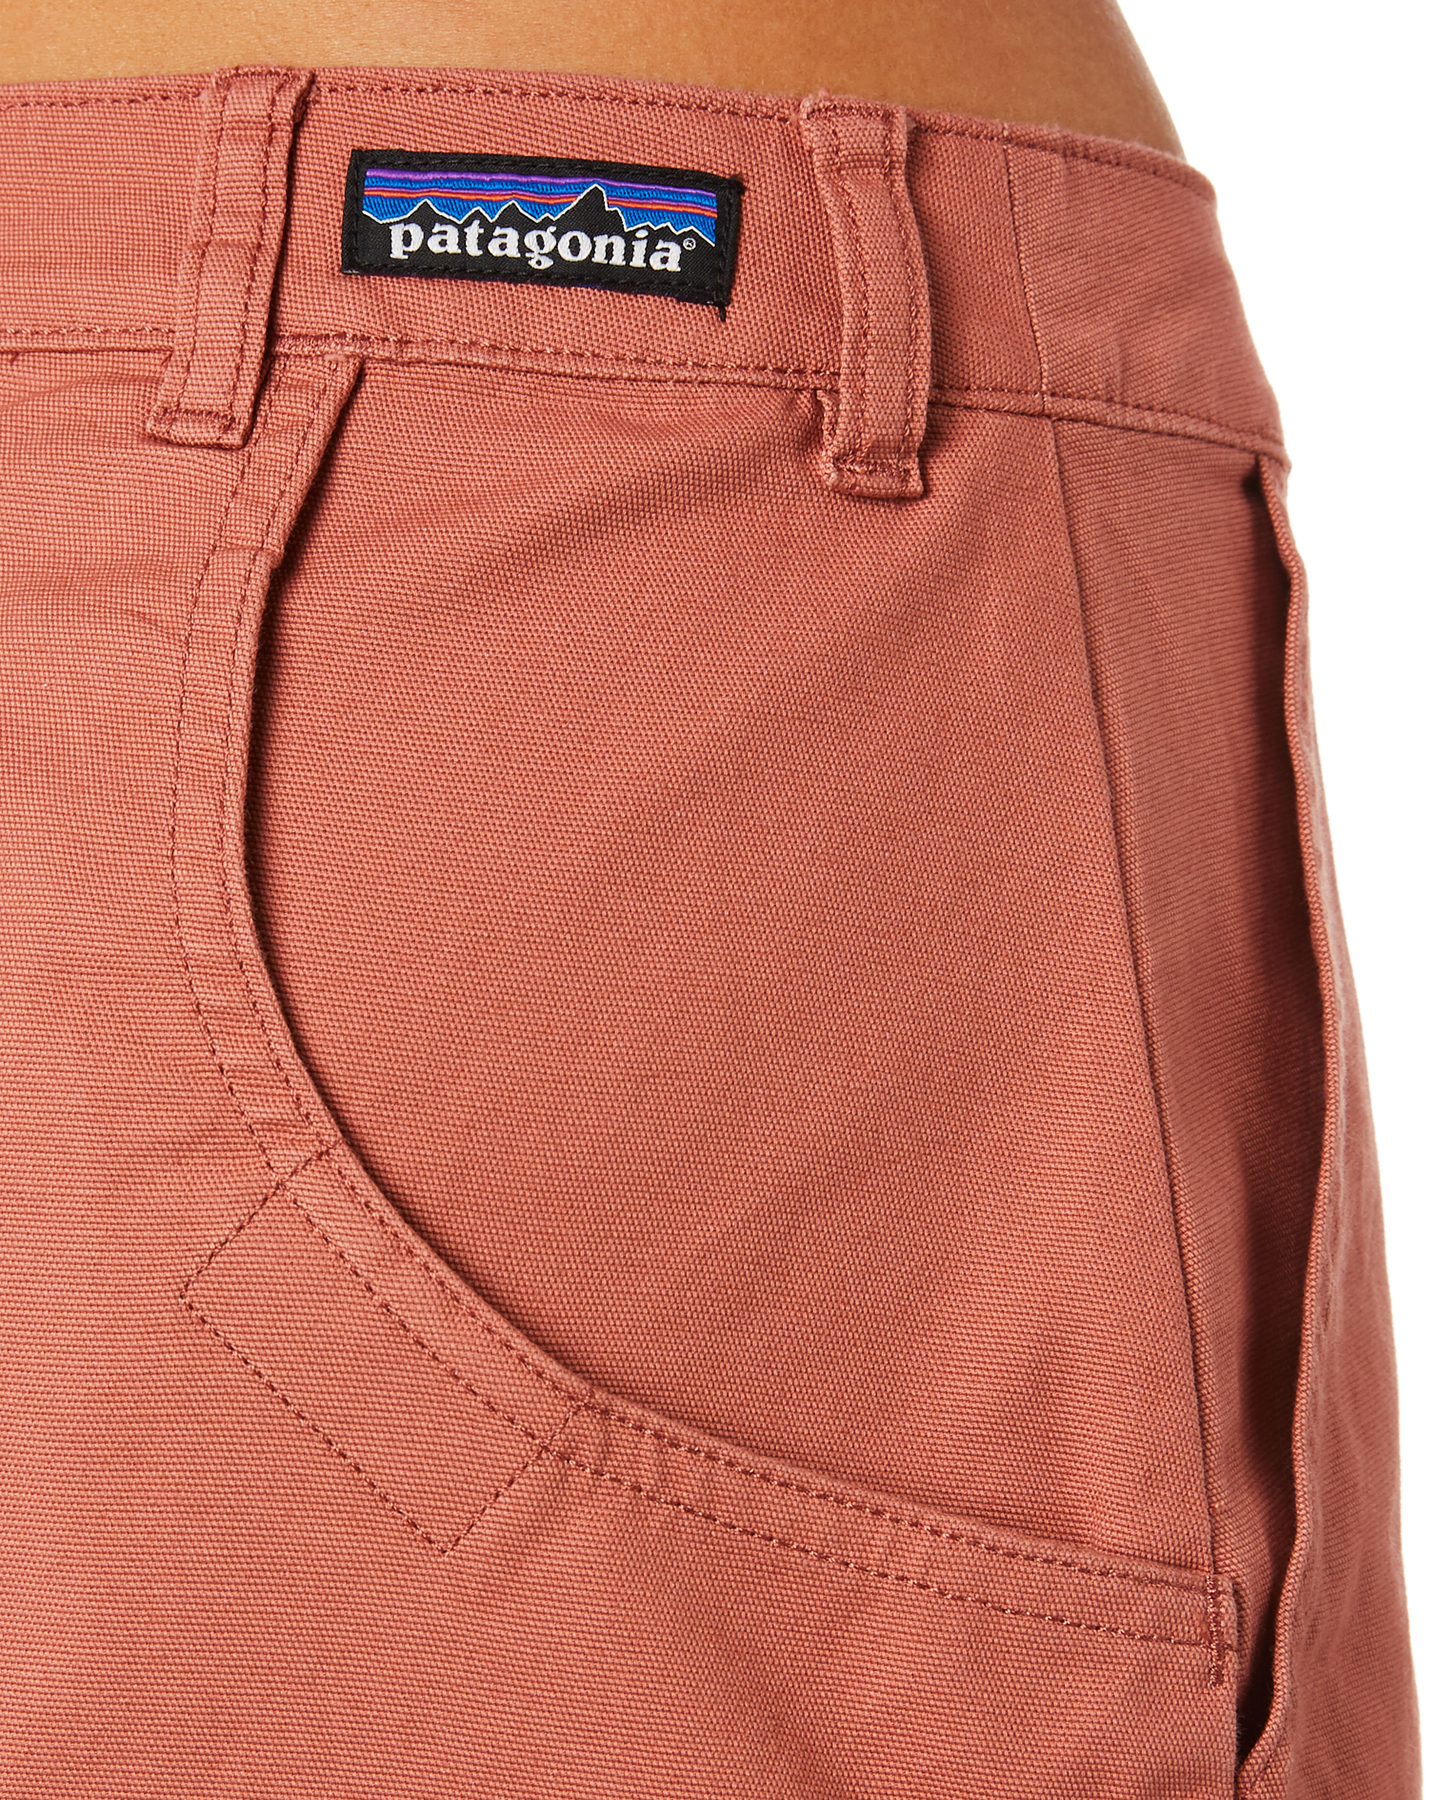 Patagonia Stand Up Skirt - Century Pink | SurfStitch